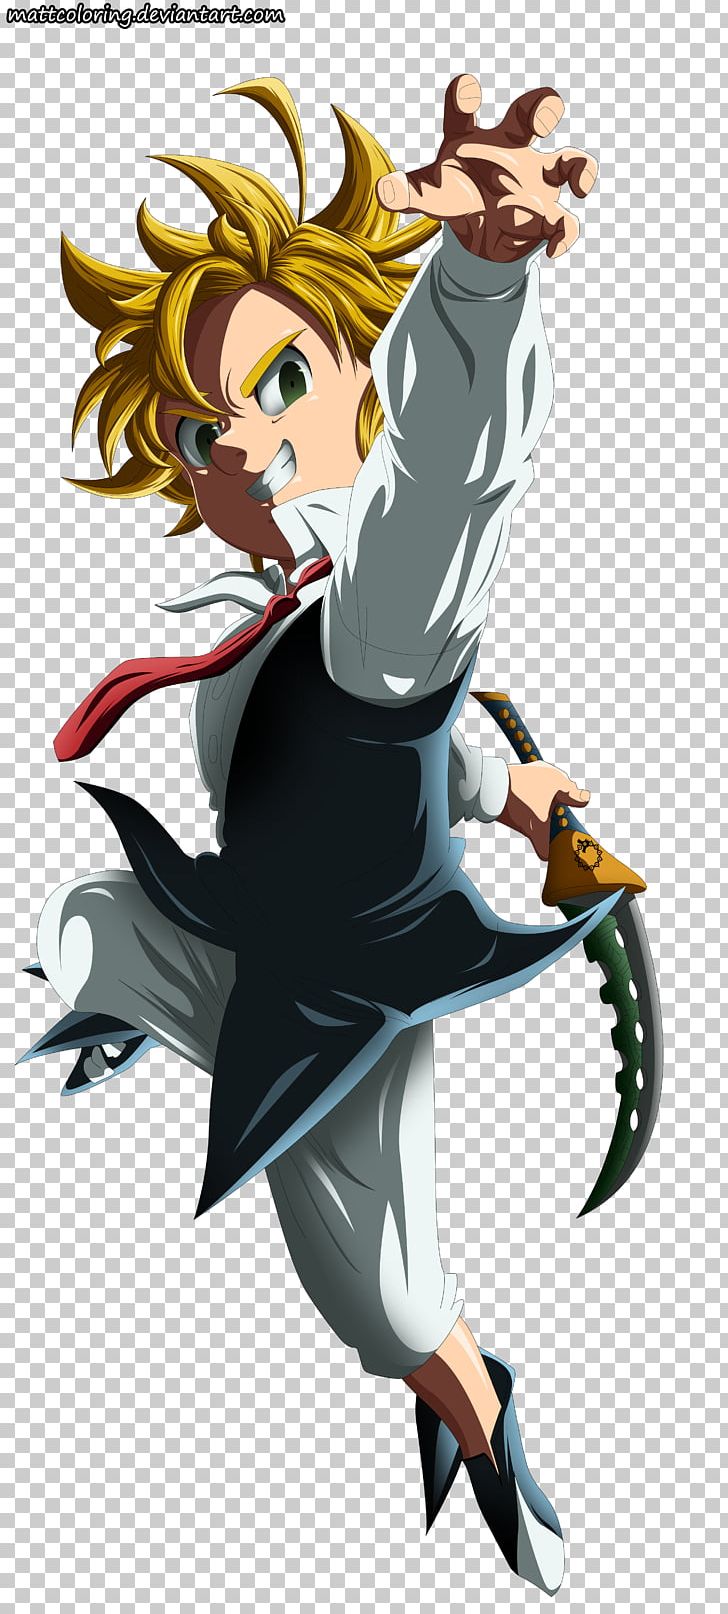 Meliodas The Seven Deadly Sins Anime PNG, Clipart, Anime, Art, Cartoon, Character, Demon Free PNG Download